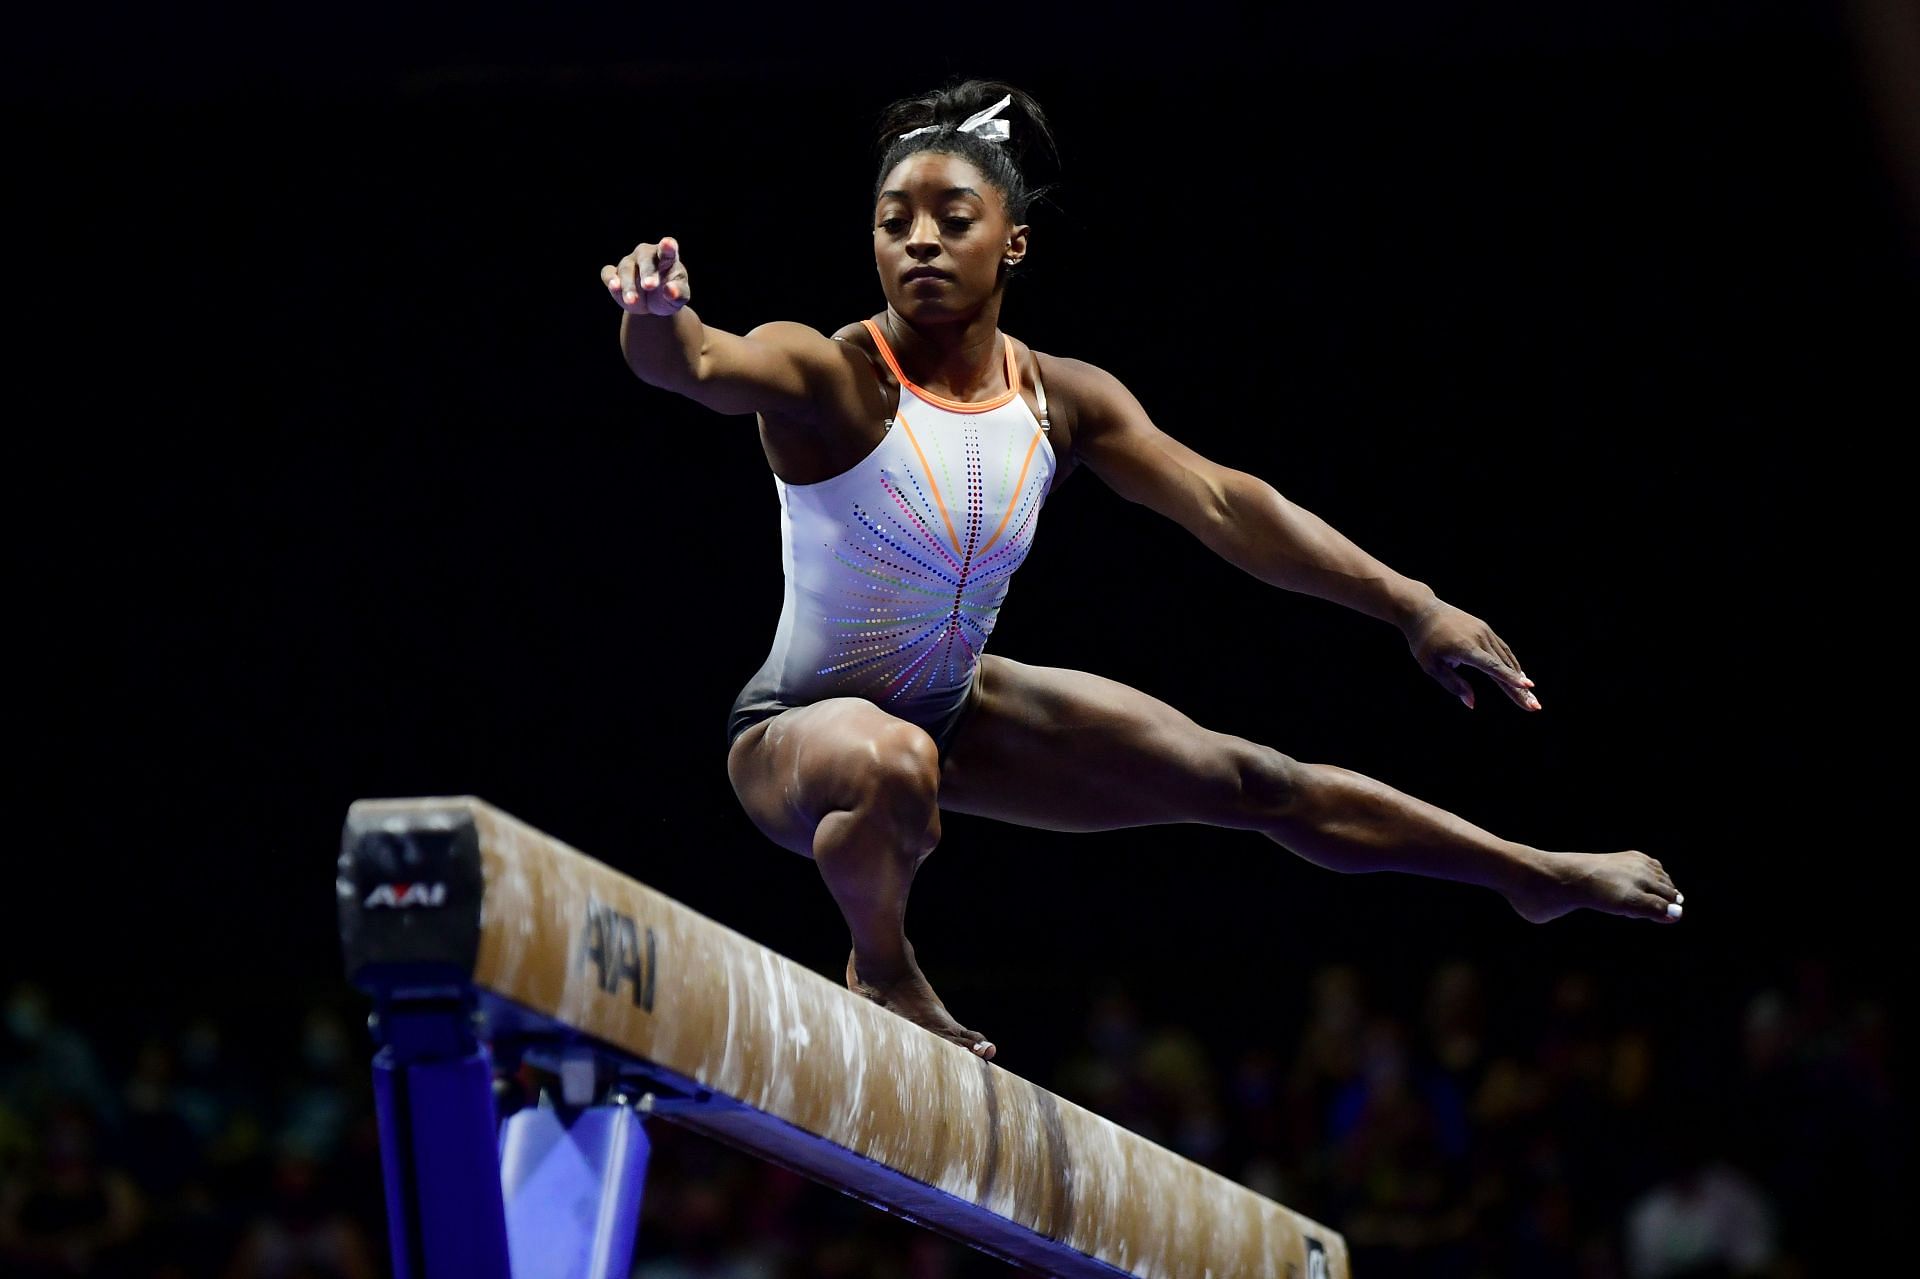 Simone Biles warming up on the beam prior to the 2021 GK U.S. Gymnastics Classic competition at Indiana Convention Centre in Indianapolis, Indiana